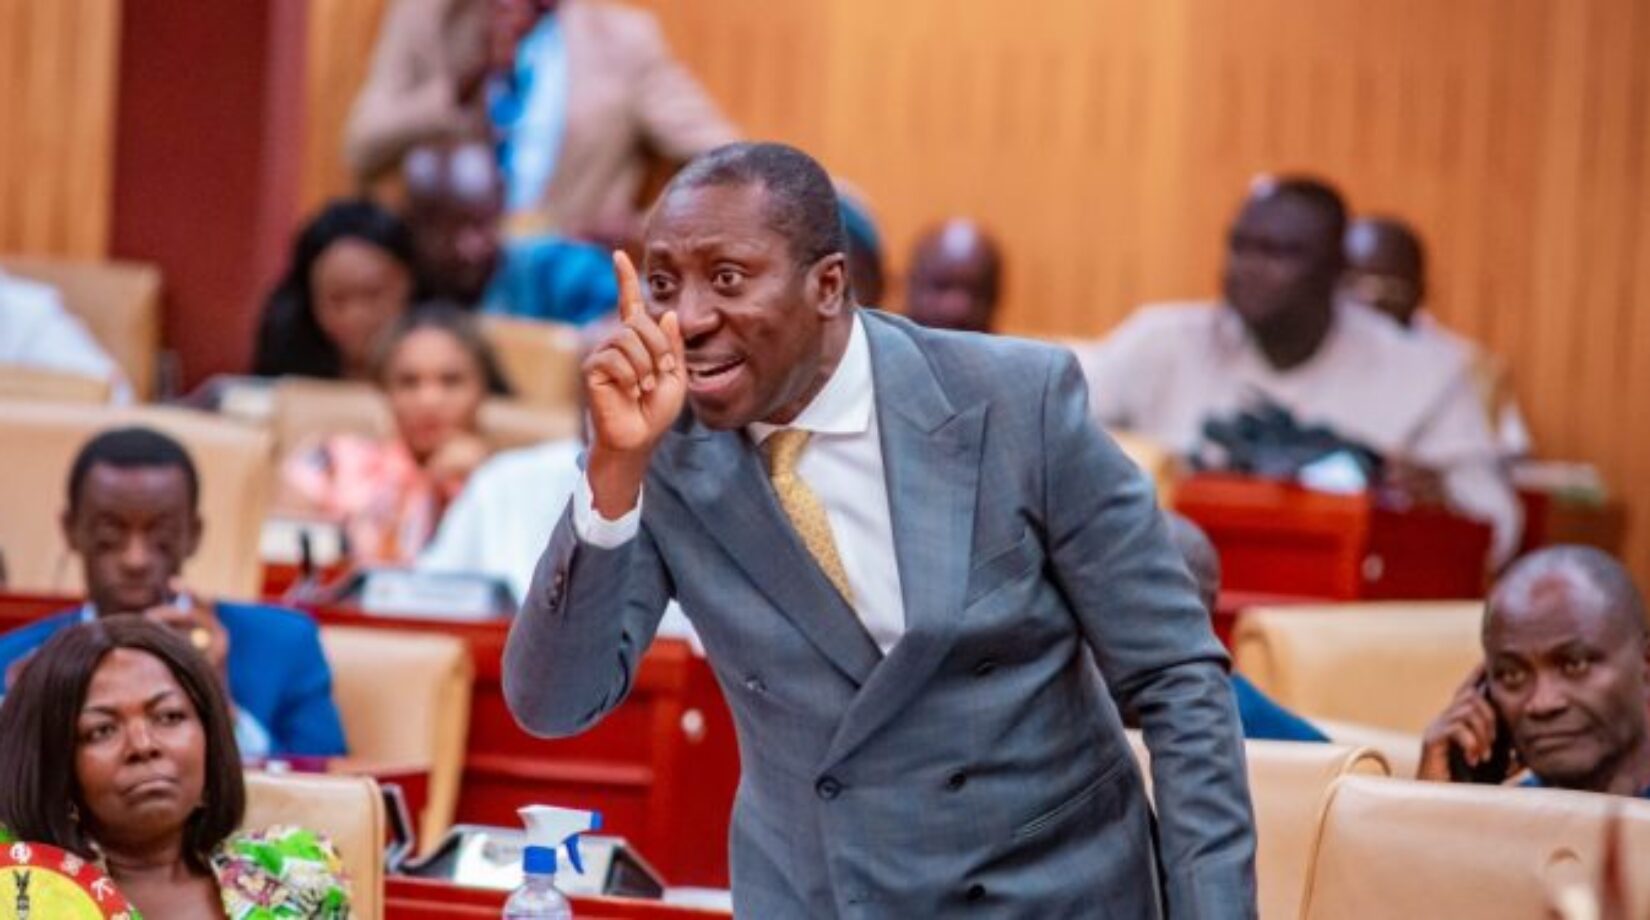 Majority Leader warns NPP MPs to stop badmouthing each other after Bawumia picks Opoku Prempeh